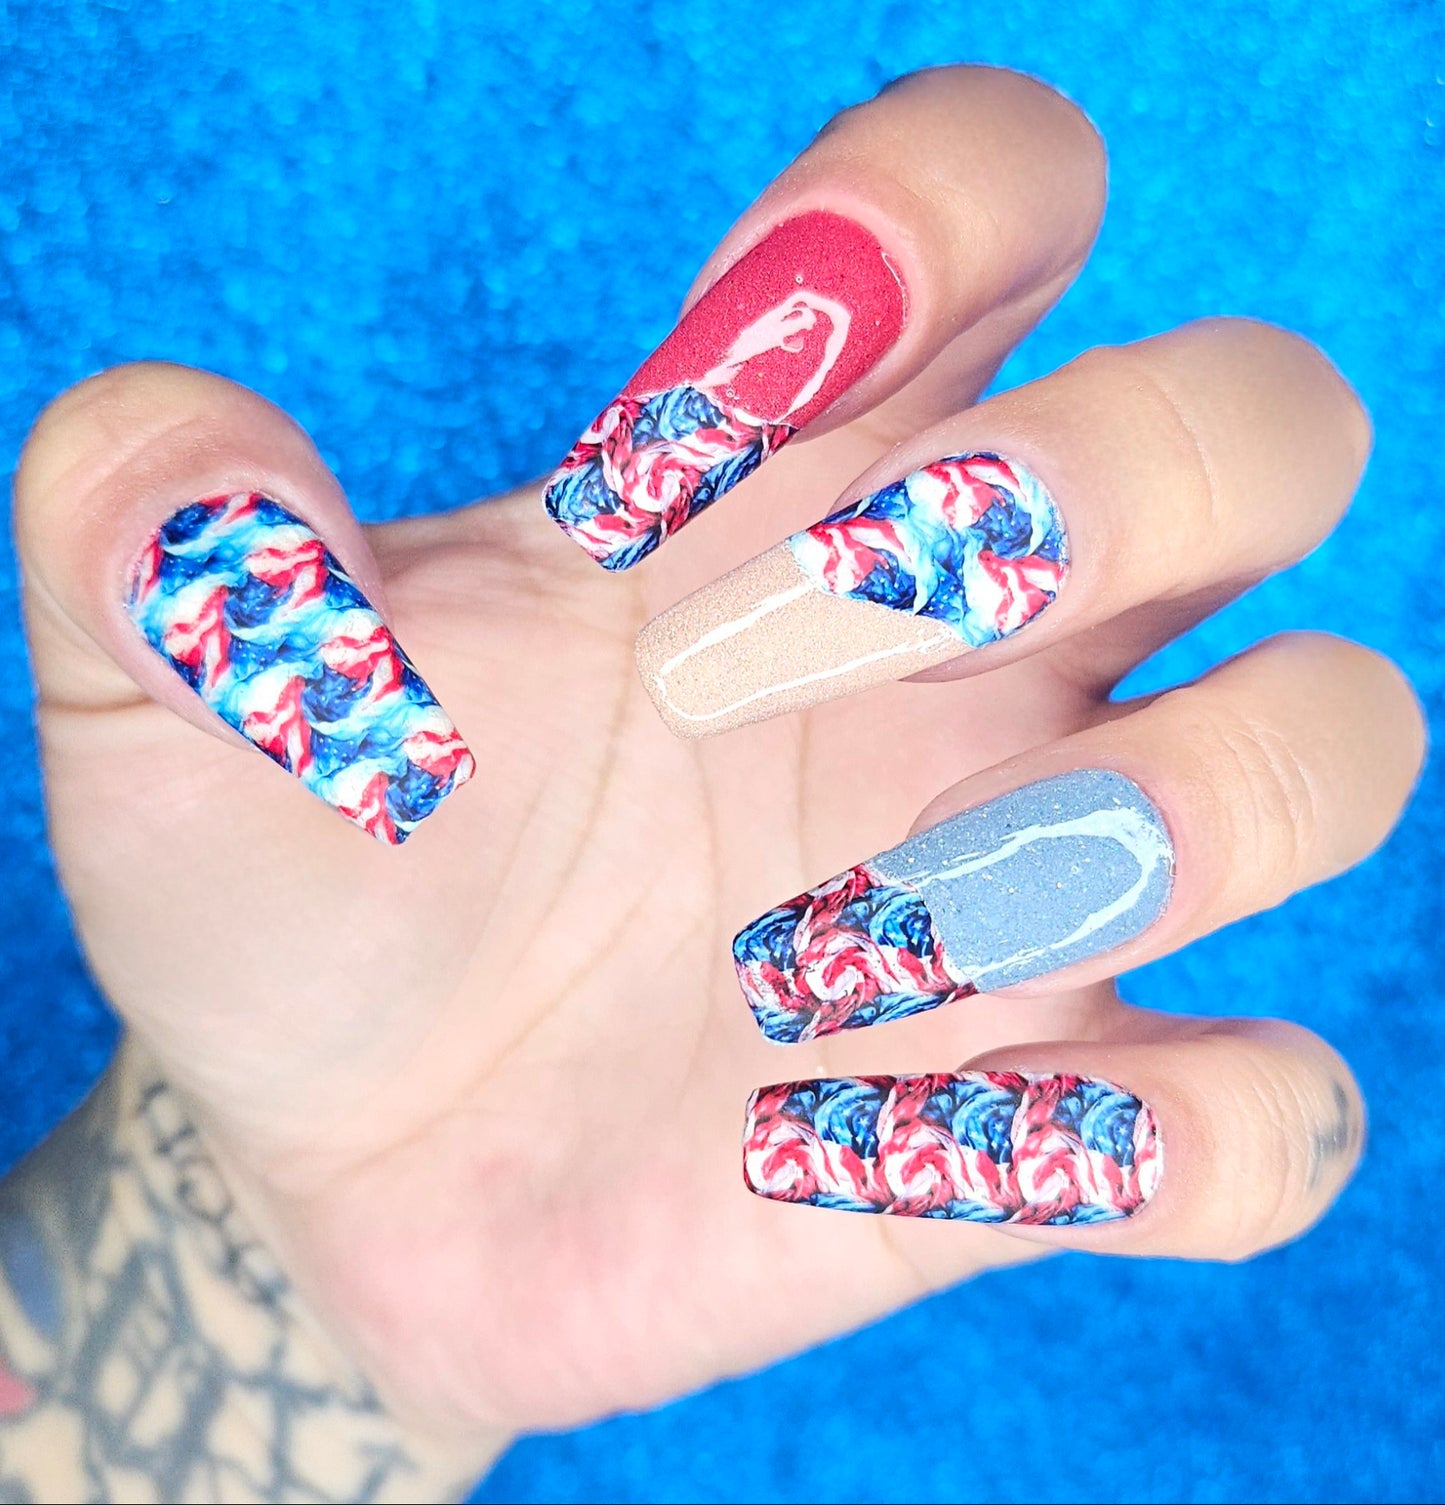 Patriotic Full Coverage Nail Wraps- Glory Flies With Honor